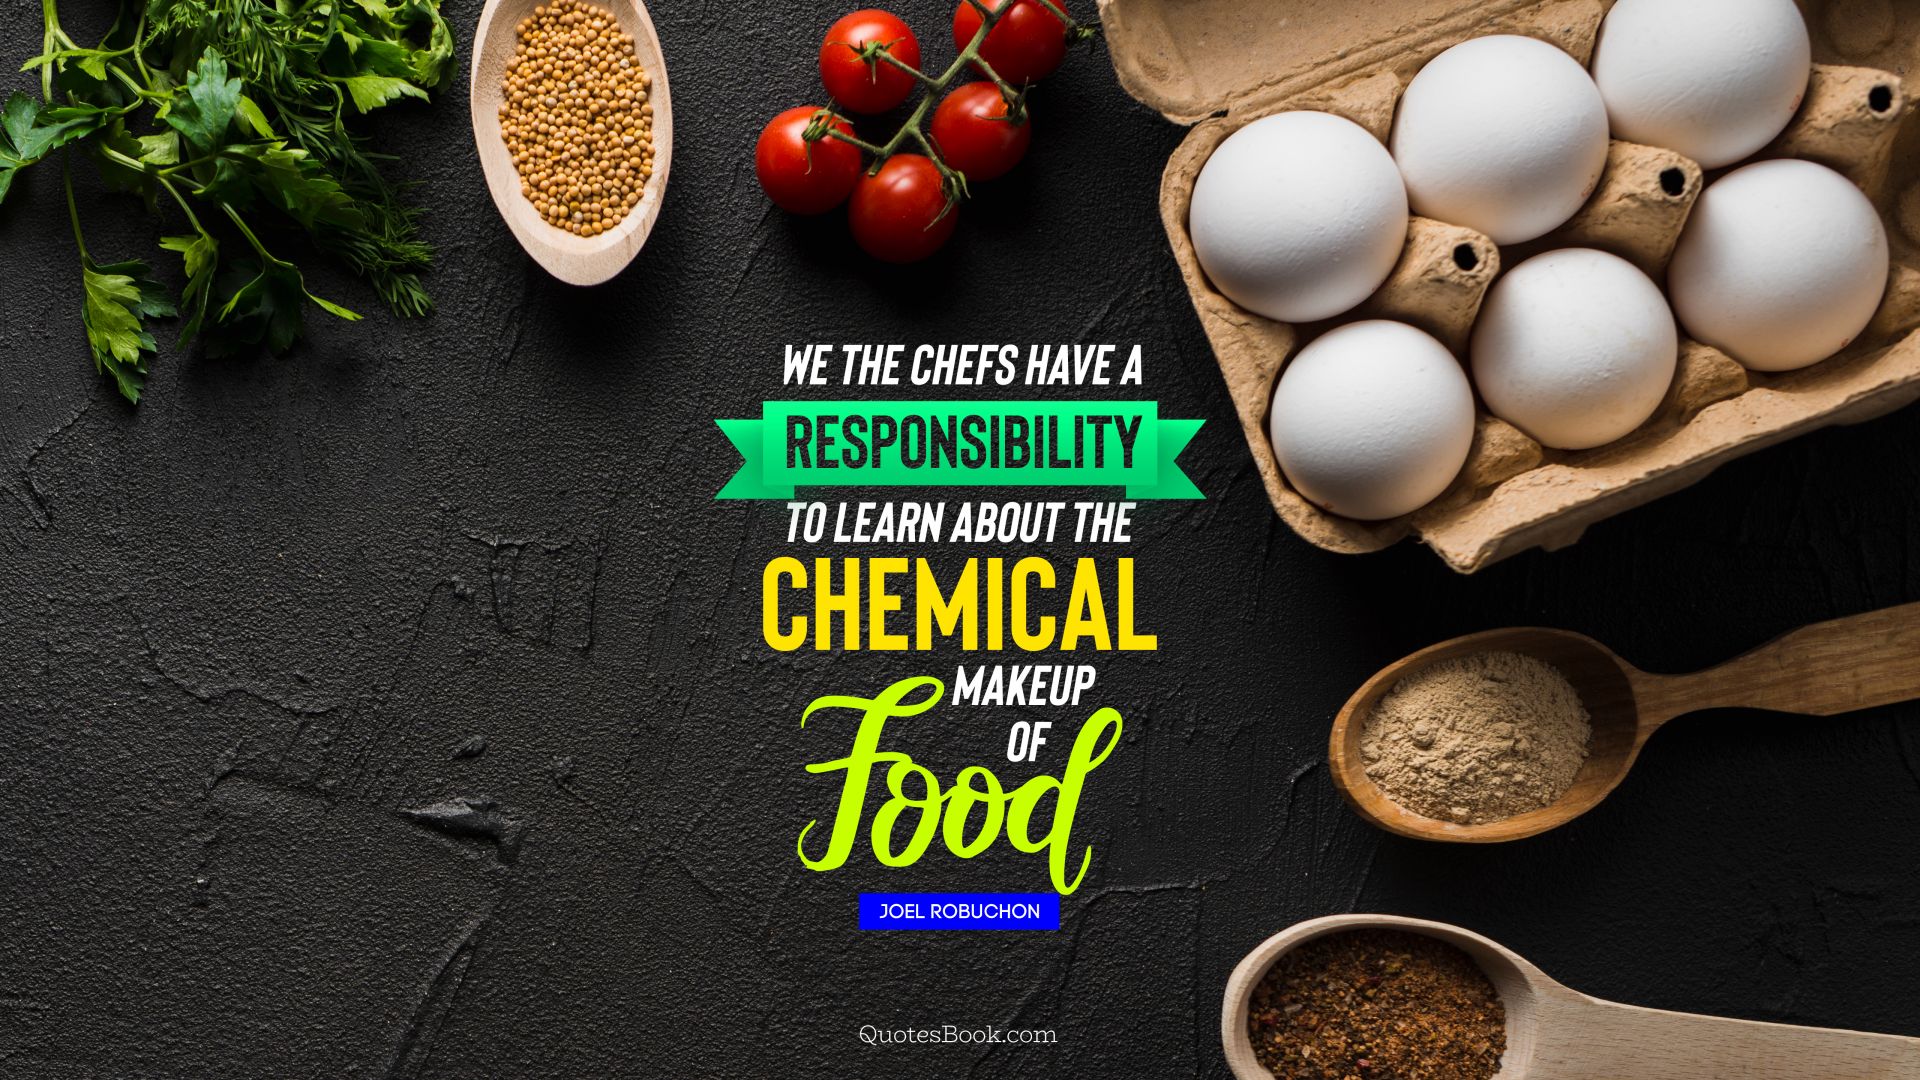 We the chefs have a responsibility to learn about the chemical makeup of food. - Quote by Joel Robuchon